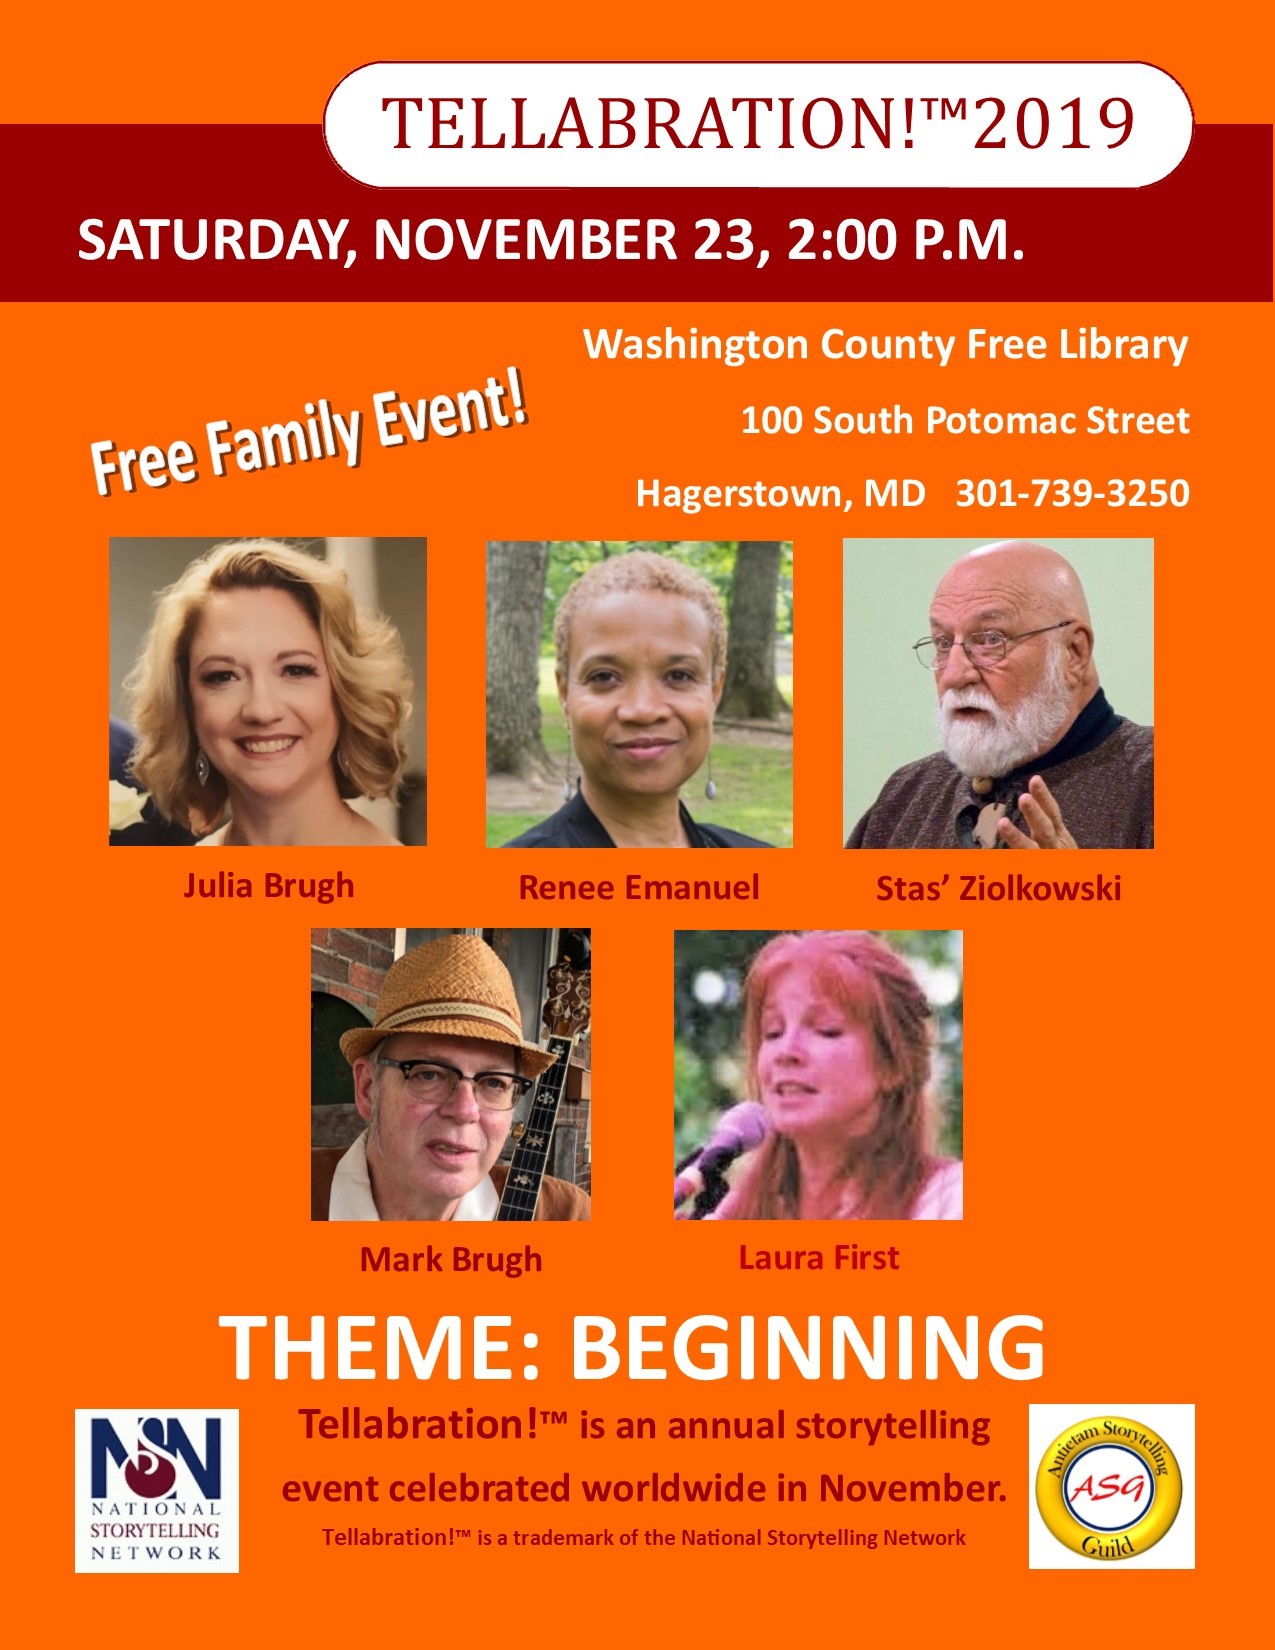 Poster for event with orange background and photos of each storyteller featured